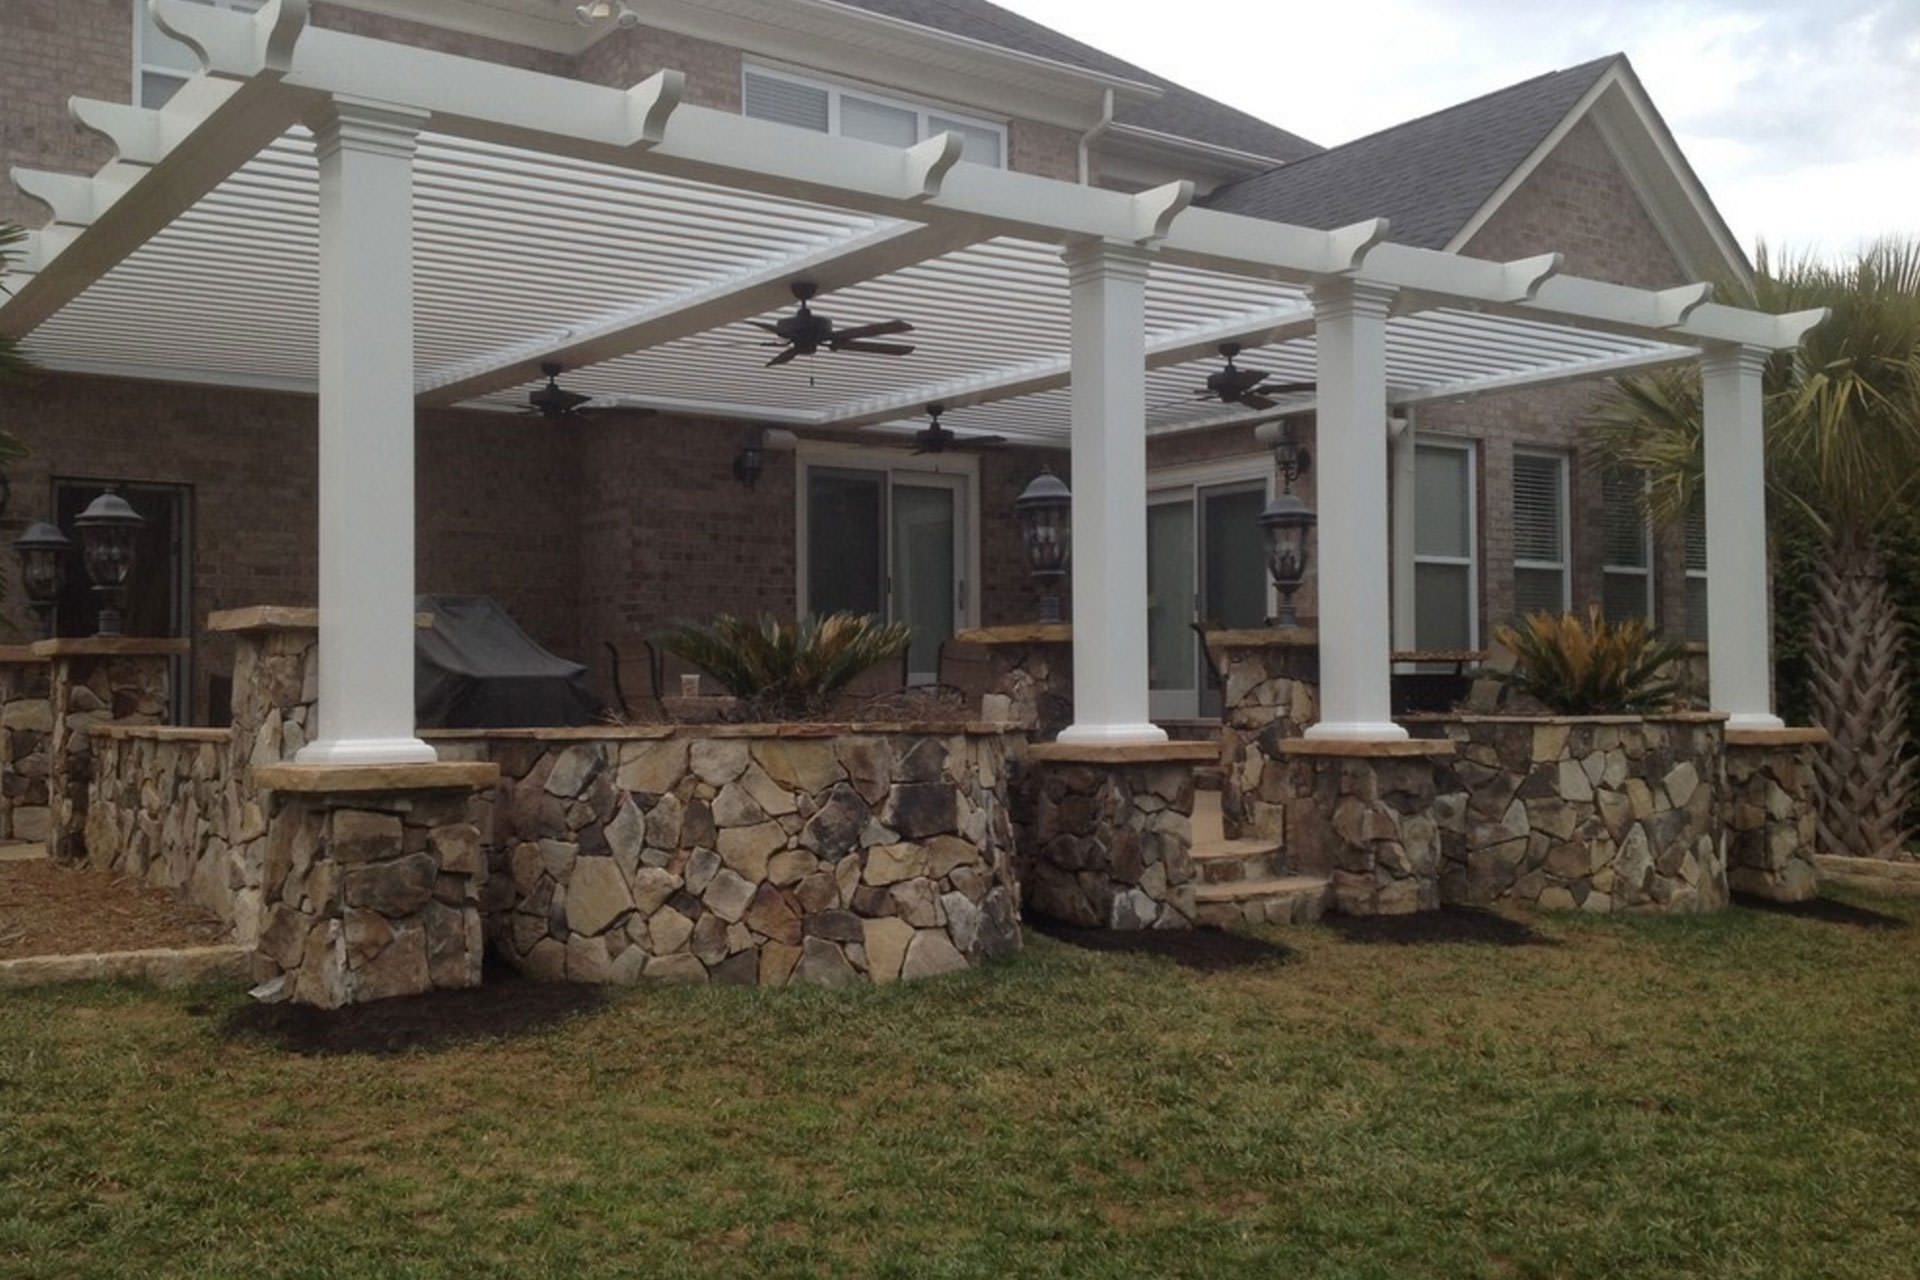 How To Put A Roof On A Pergola